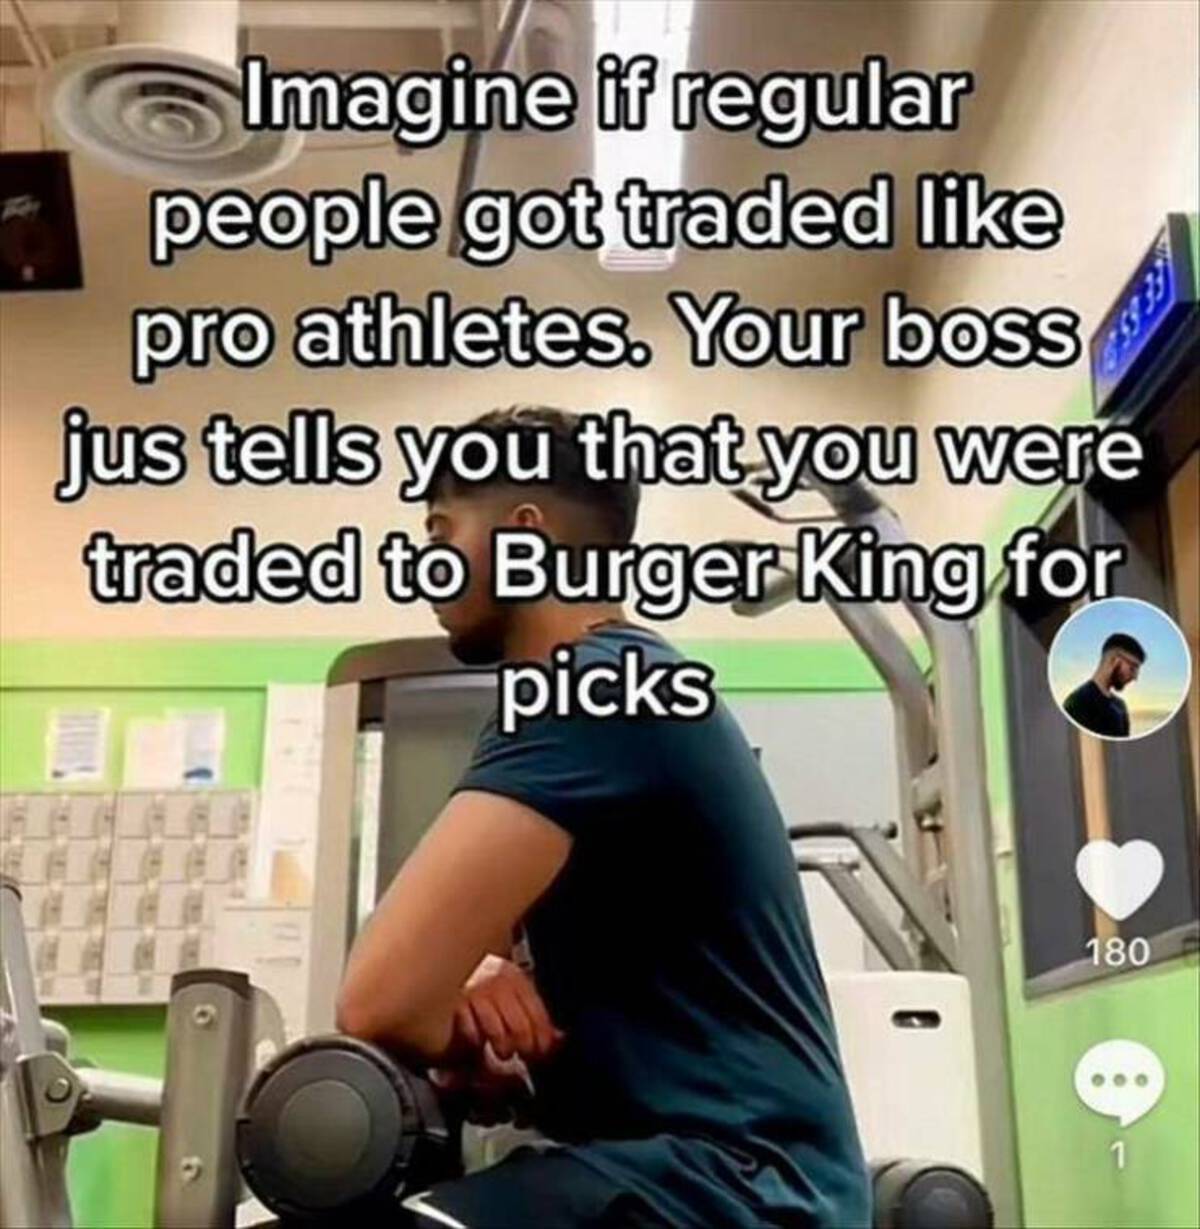 imagine if regular people got traded like pro athletes - 33333 Imagine if regular people got traded pro athletes. Your boss jus tells you that you were traded to Burger King for picks 180 1